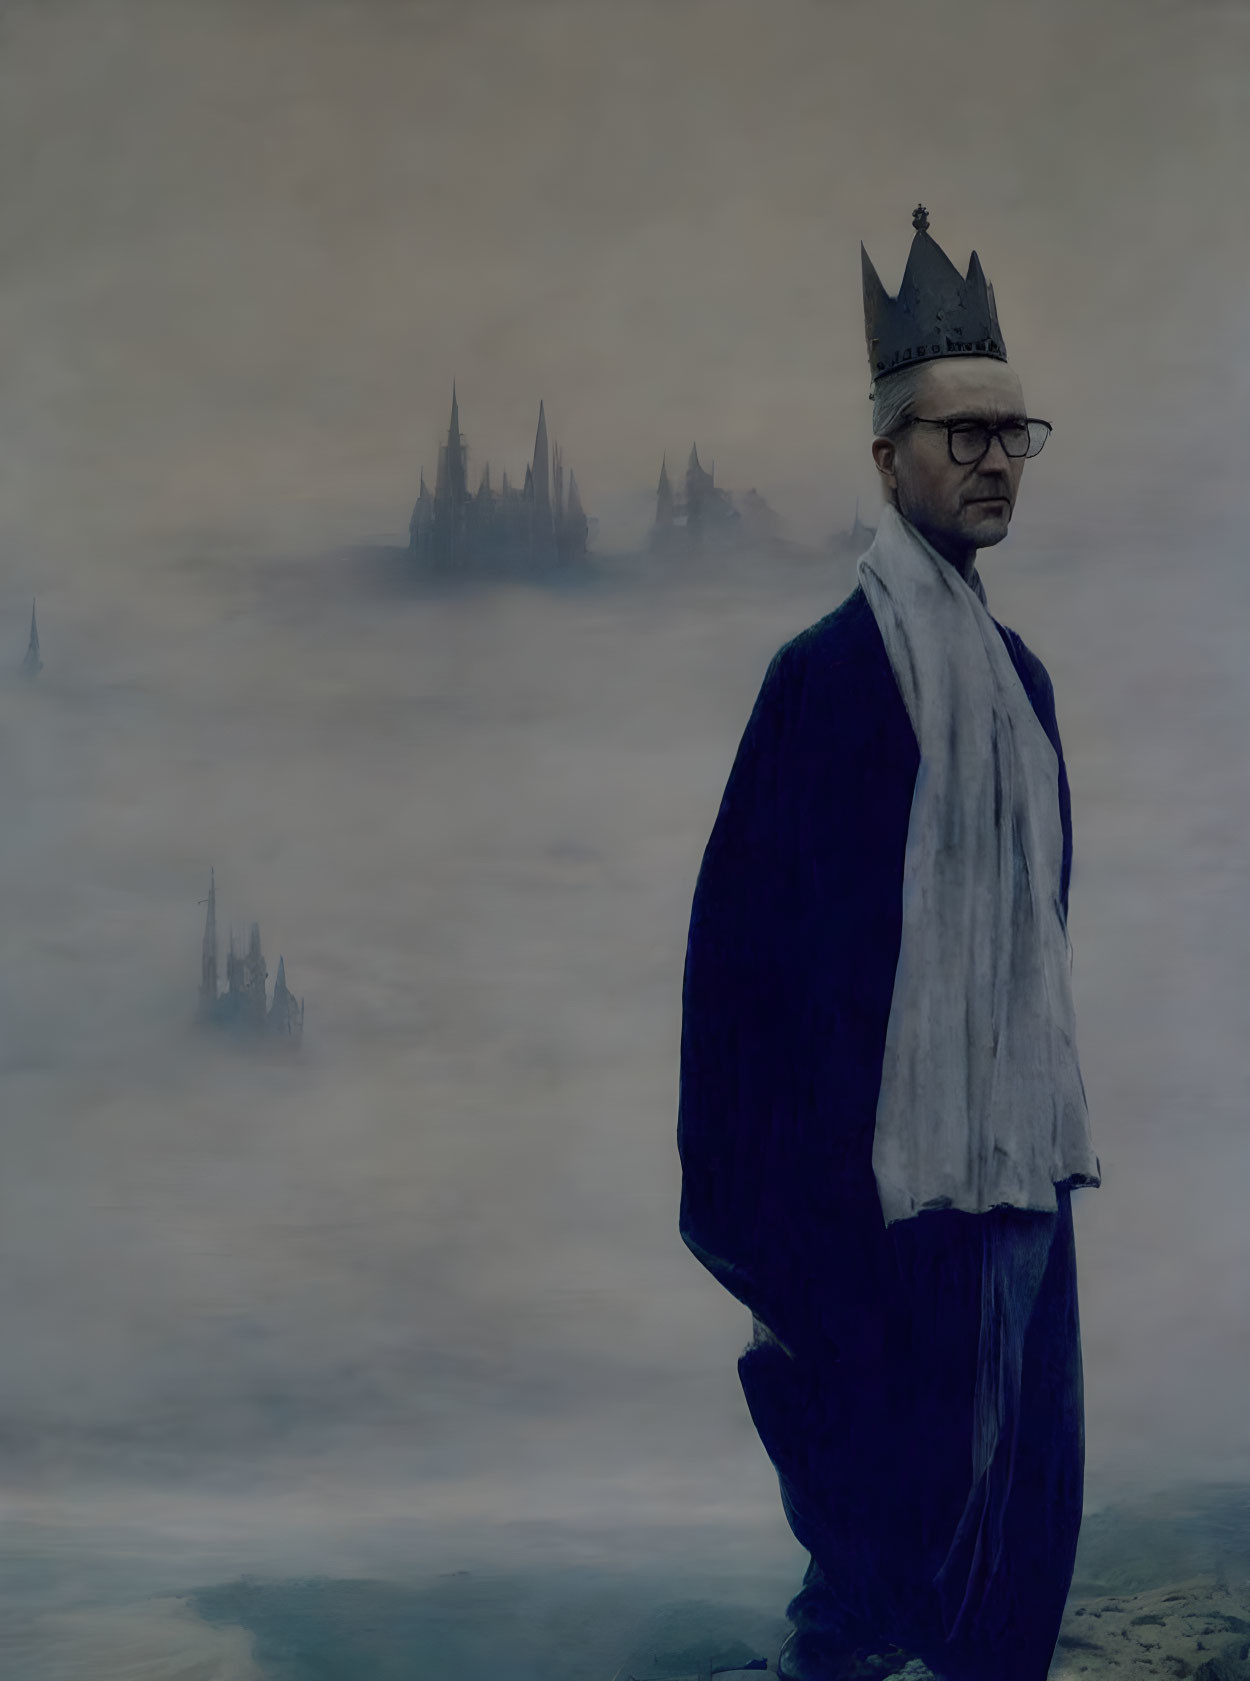 Contemplative person in makeshift crown gazes at foggy landscape